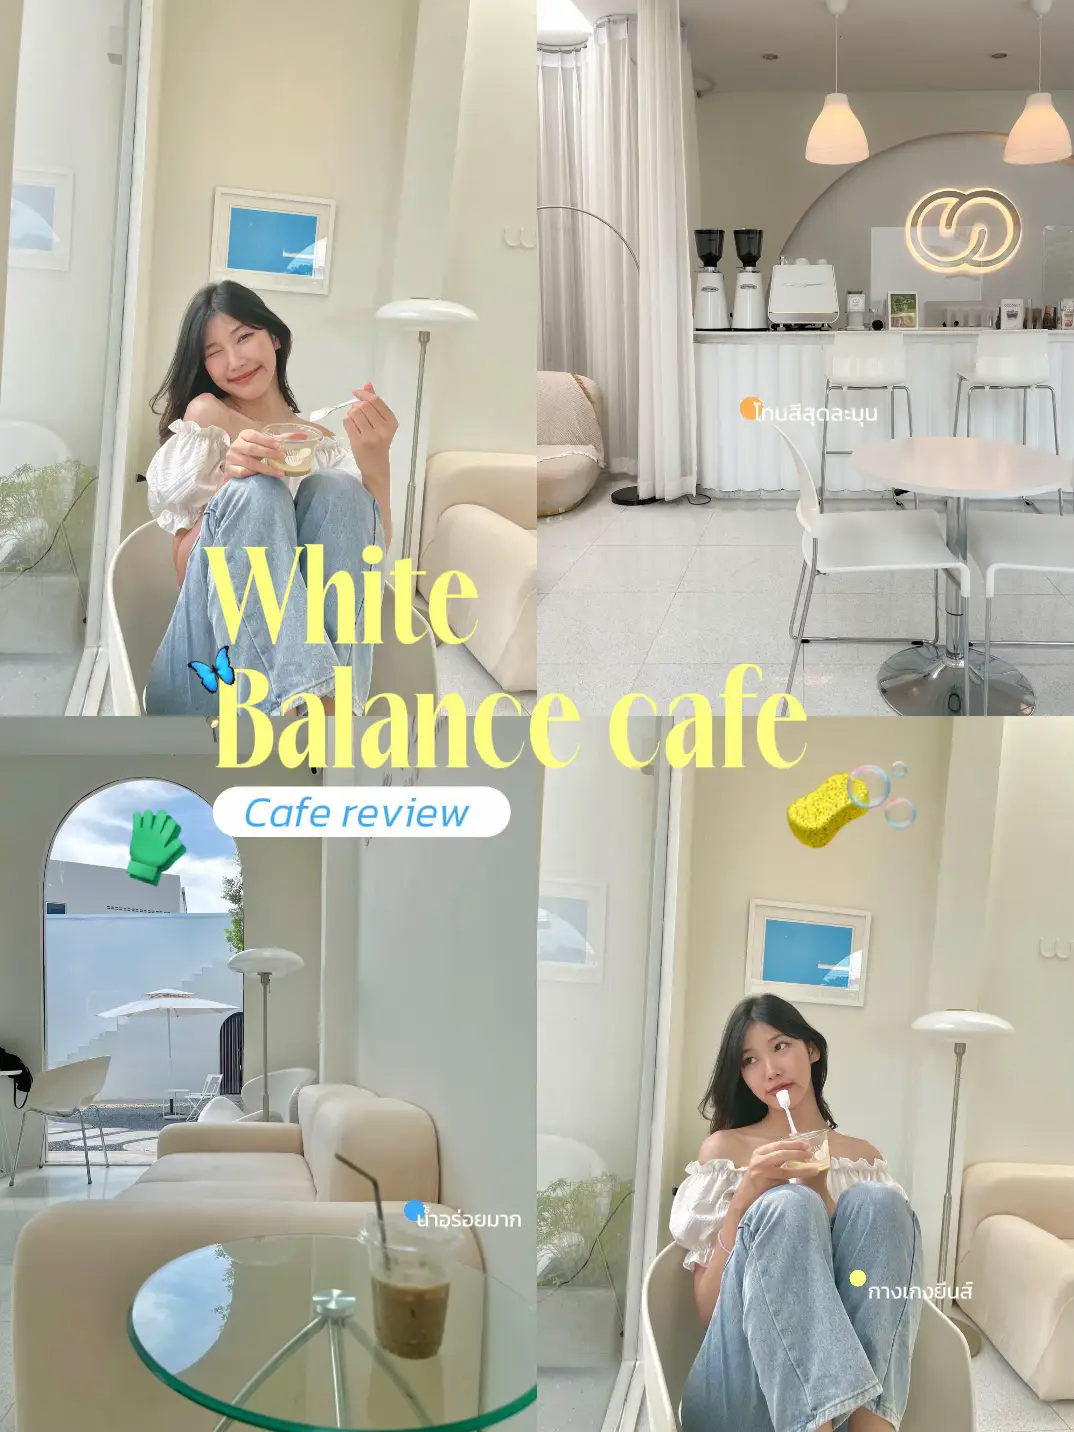 White Balance cafe, minimalist cafe ♡🐰, Gallery posted by Pepie 🍅💥